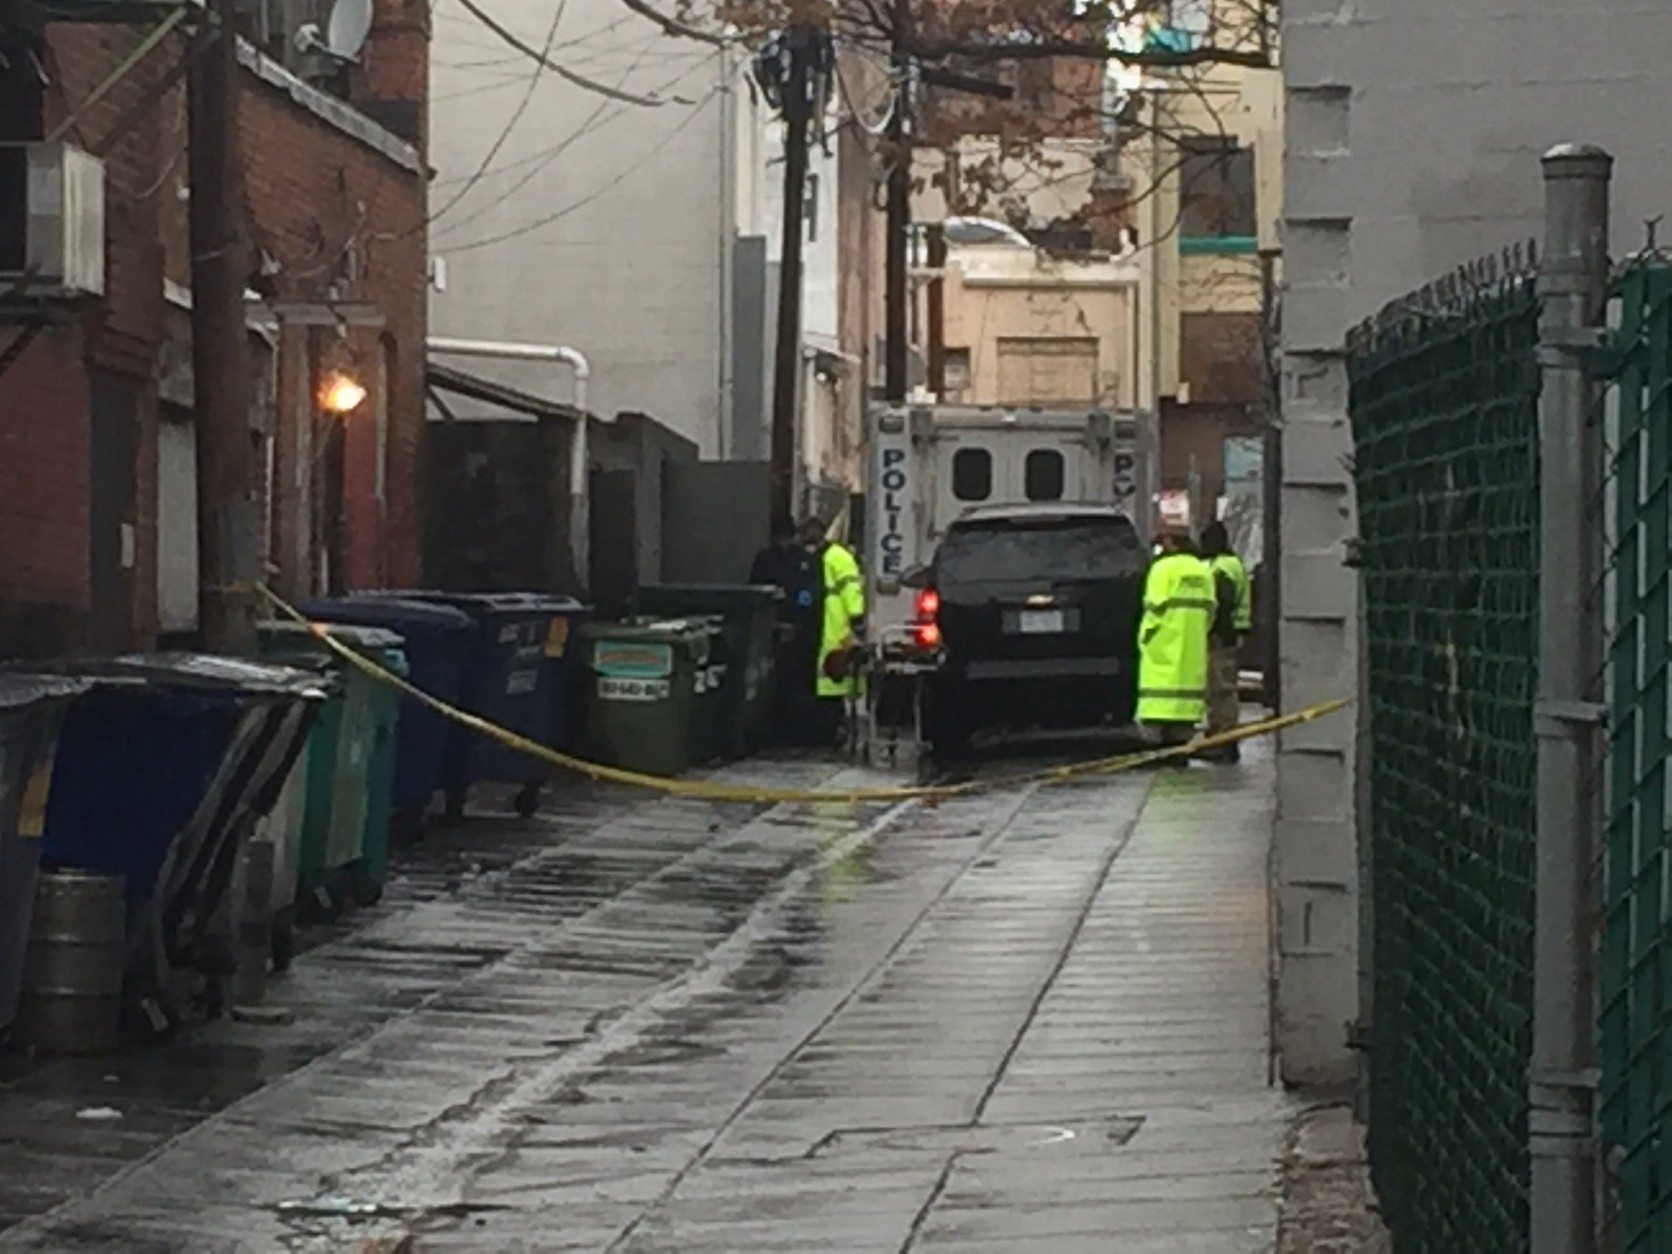 D.C. police investigate the discovery of a body on Dec. 17, 2015 in Adams Morgan. (WTOP/Mike Murillo)